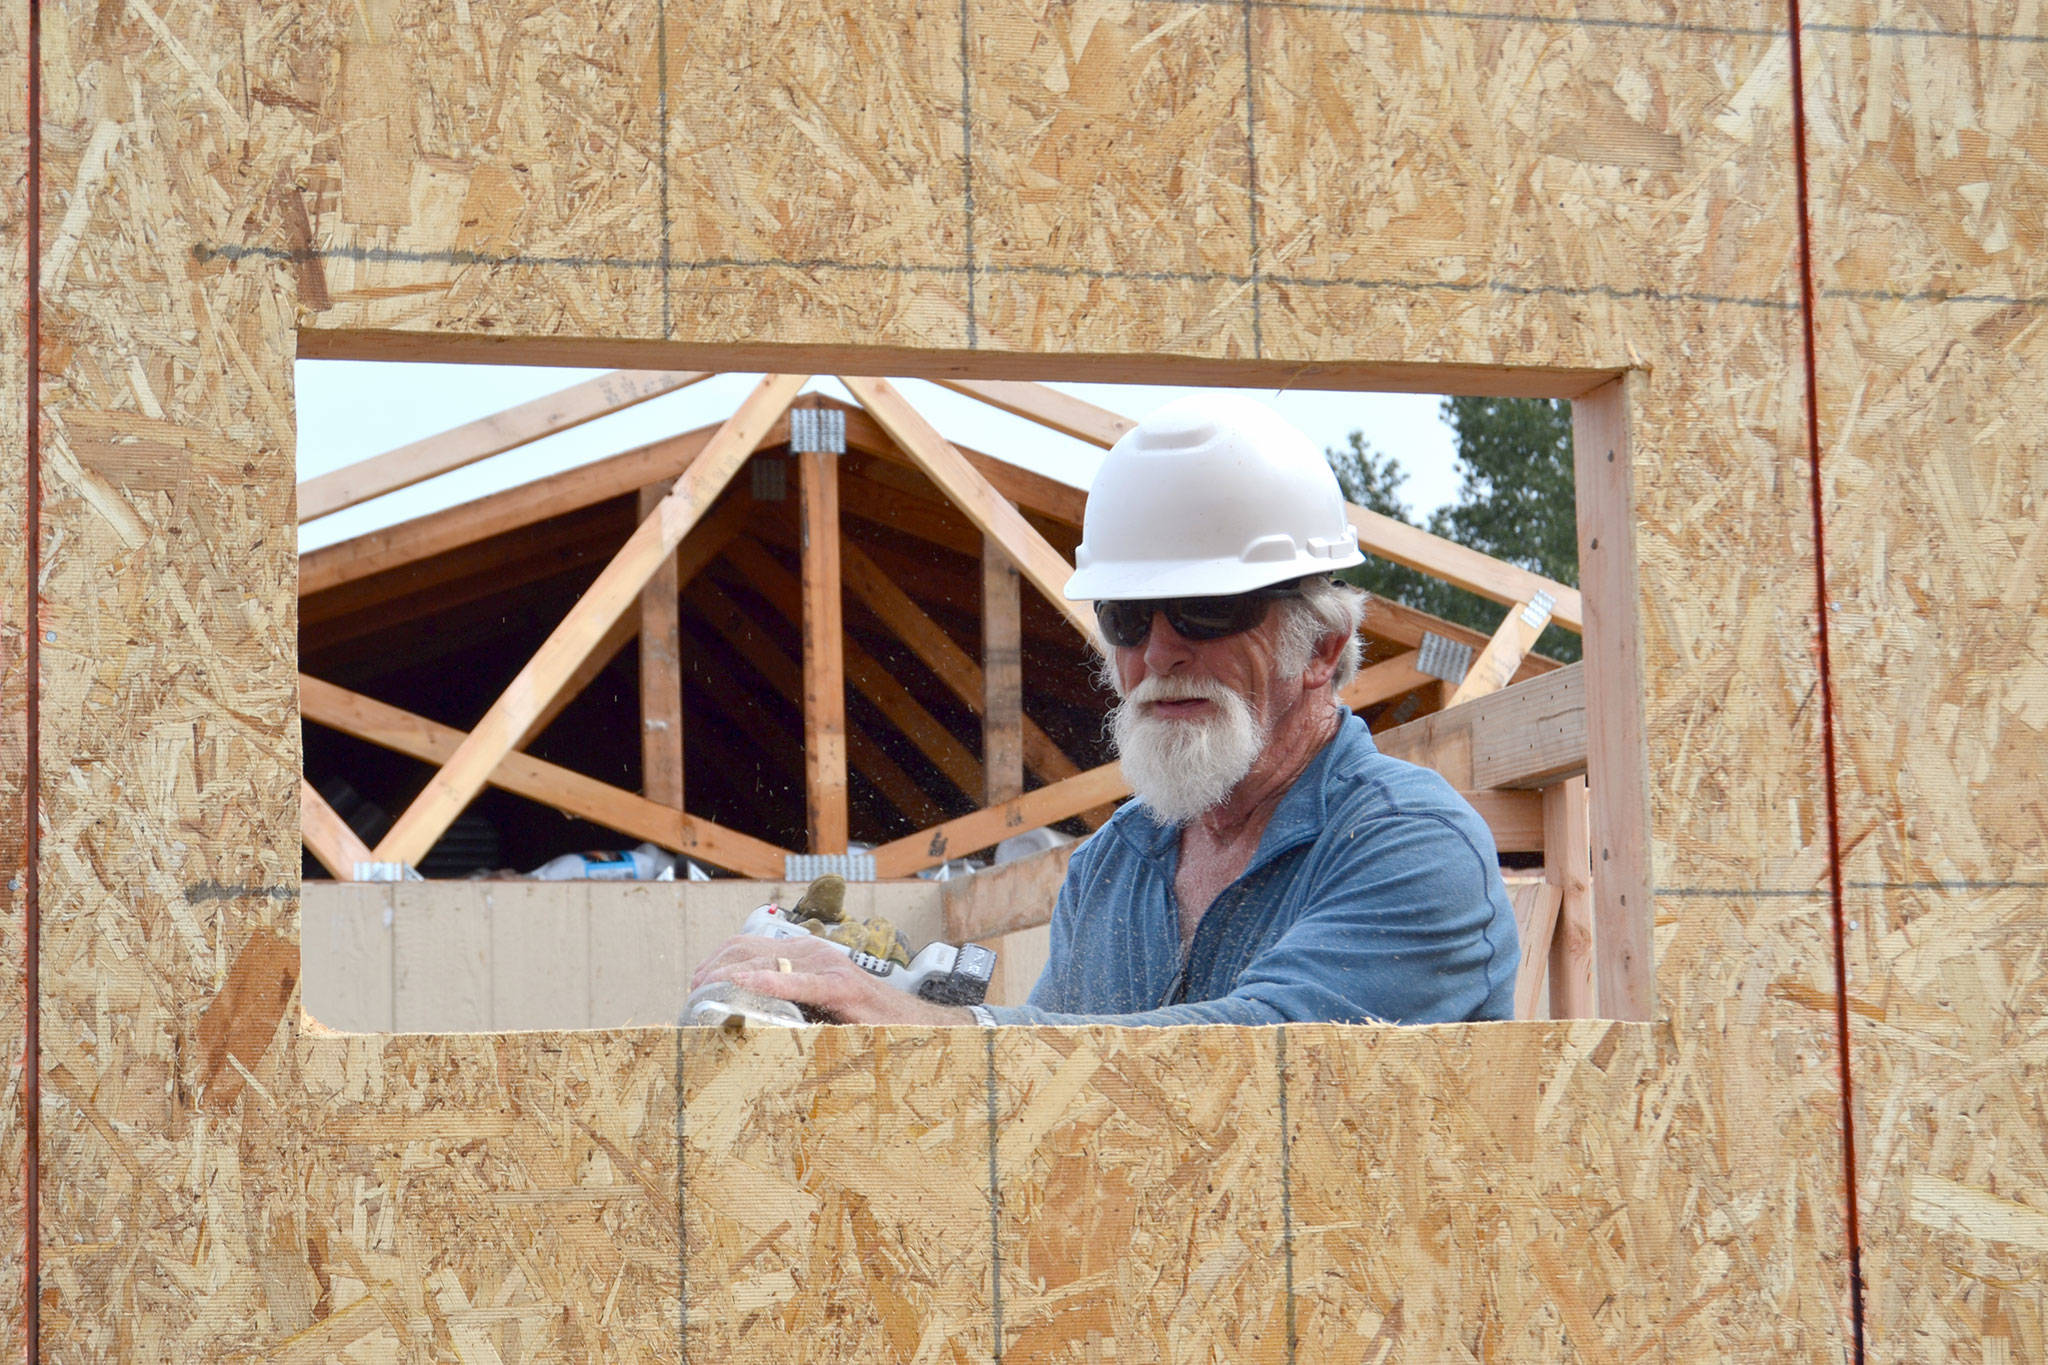 Bill Prichard of Anacortes cuts out a window on a new mower shed in Carrie Blake Community Park. Prichard and his wife are two of 20-plus Care-A-Vanners with Habit for Humanity assisting with neighborhood revitalization projects in Sequim through June 15. Sequim Gazette photos by Matthew Nash